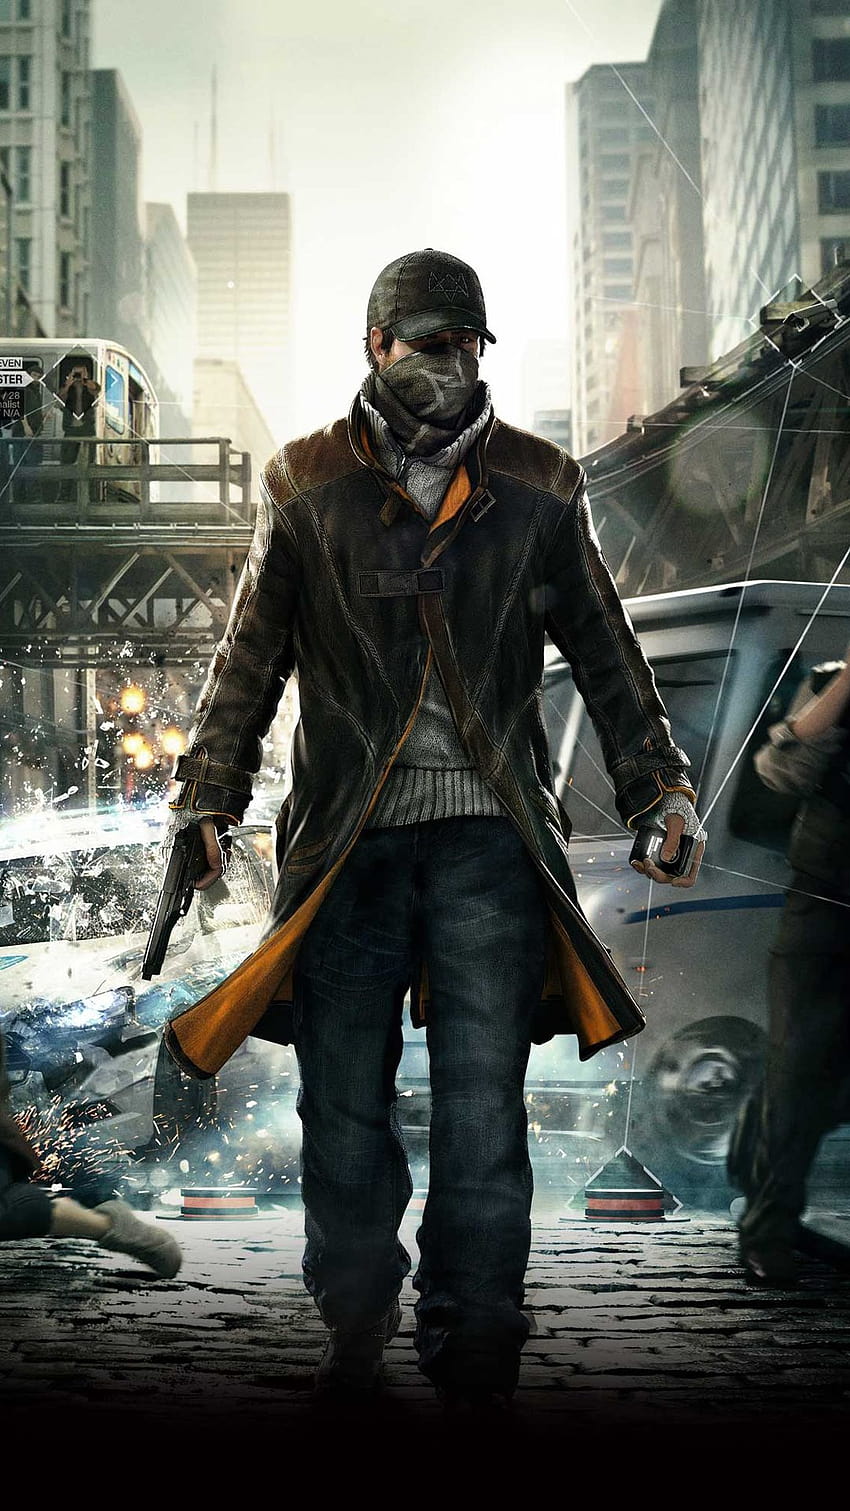 ↑↑TAP AND GET THE APP! For Geeks Watch Dogs Aiden Pearce Black Weapon Games iPhone 6 plus HD phone wallpaper